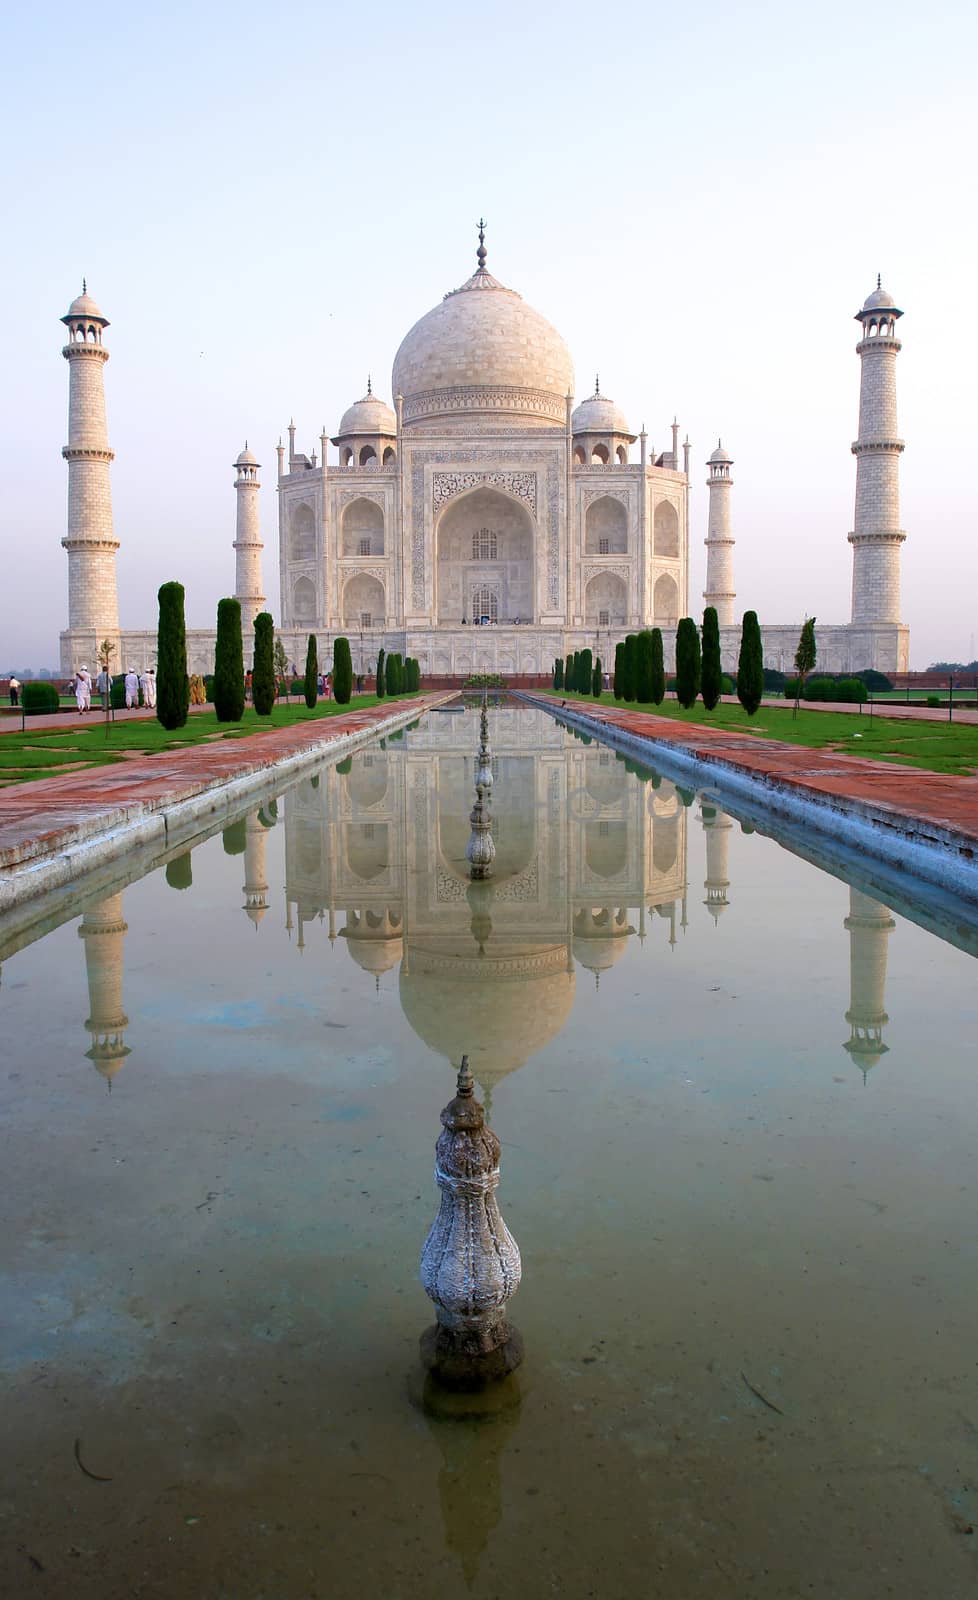 Overview of the Taj Mahal and garden by ptxgarfield